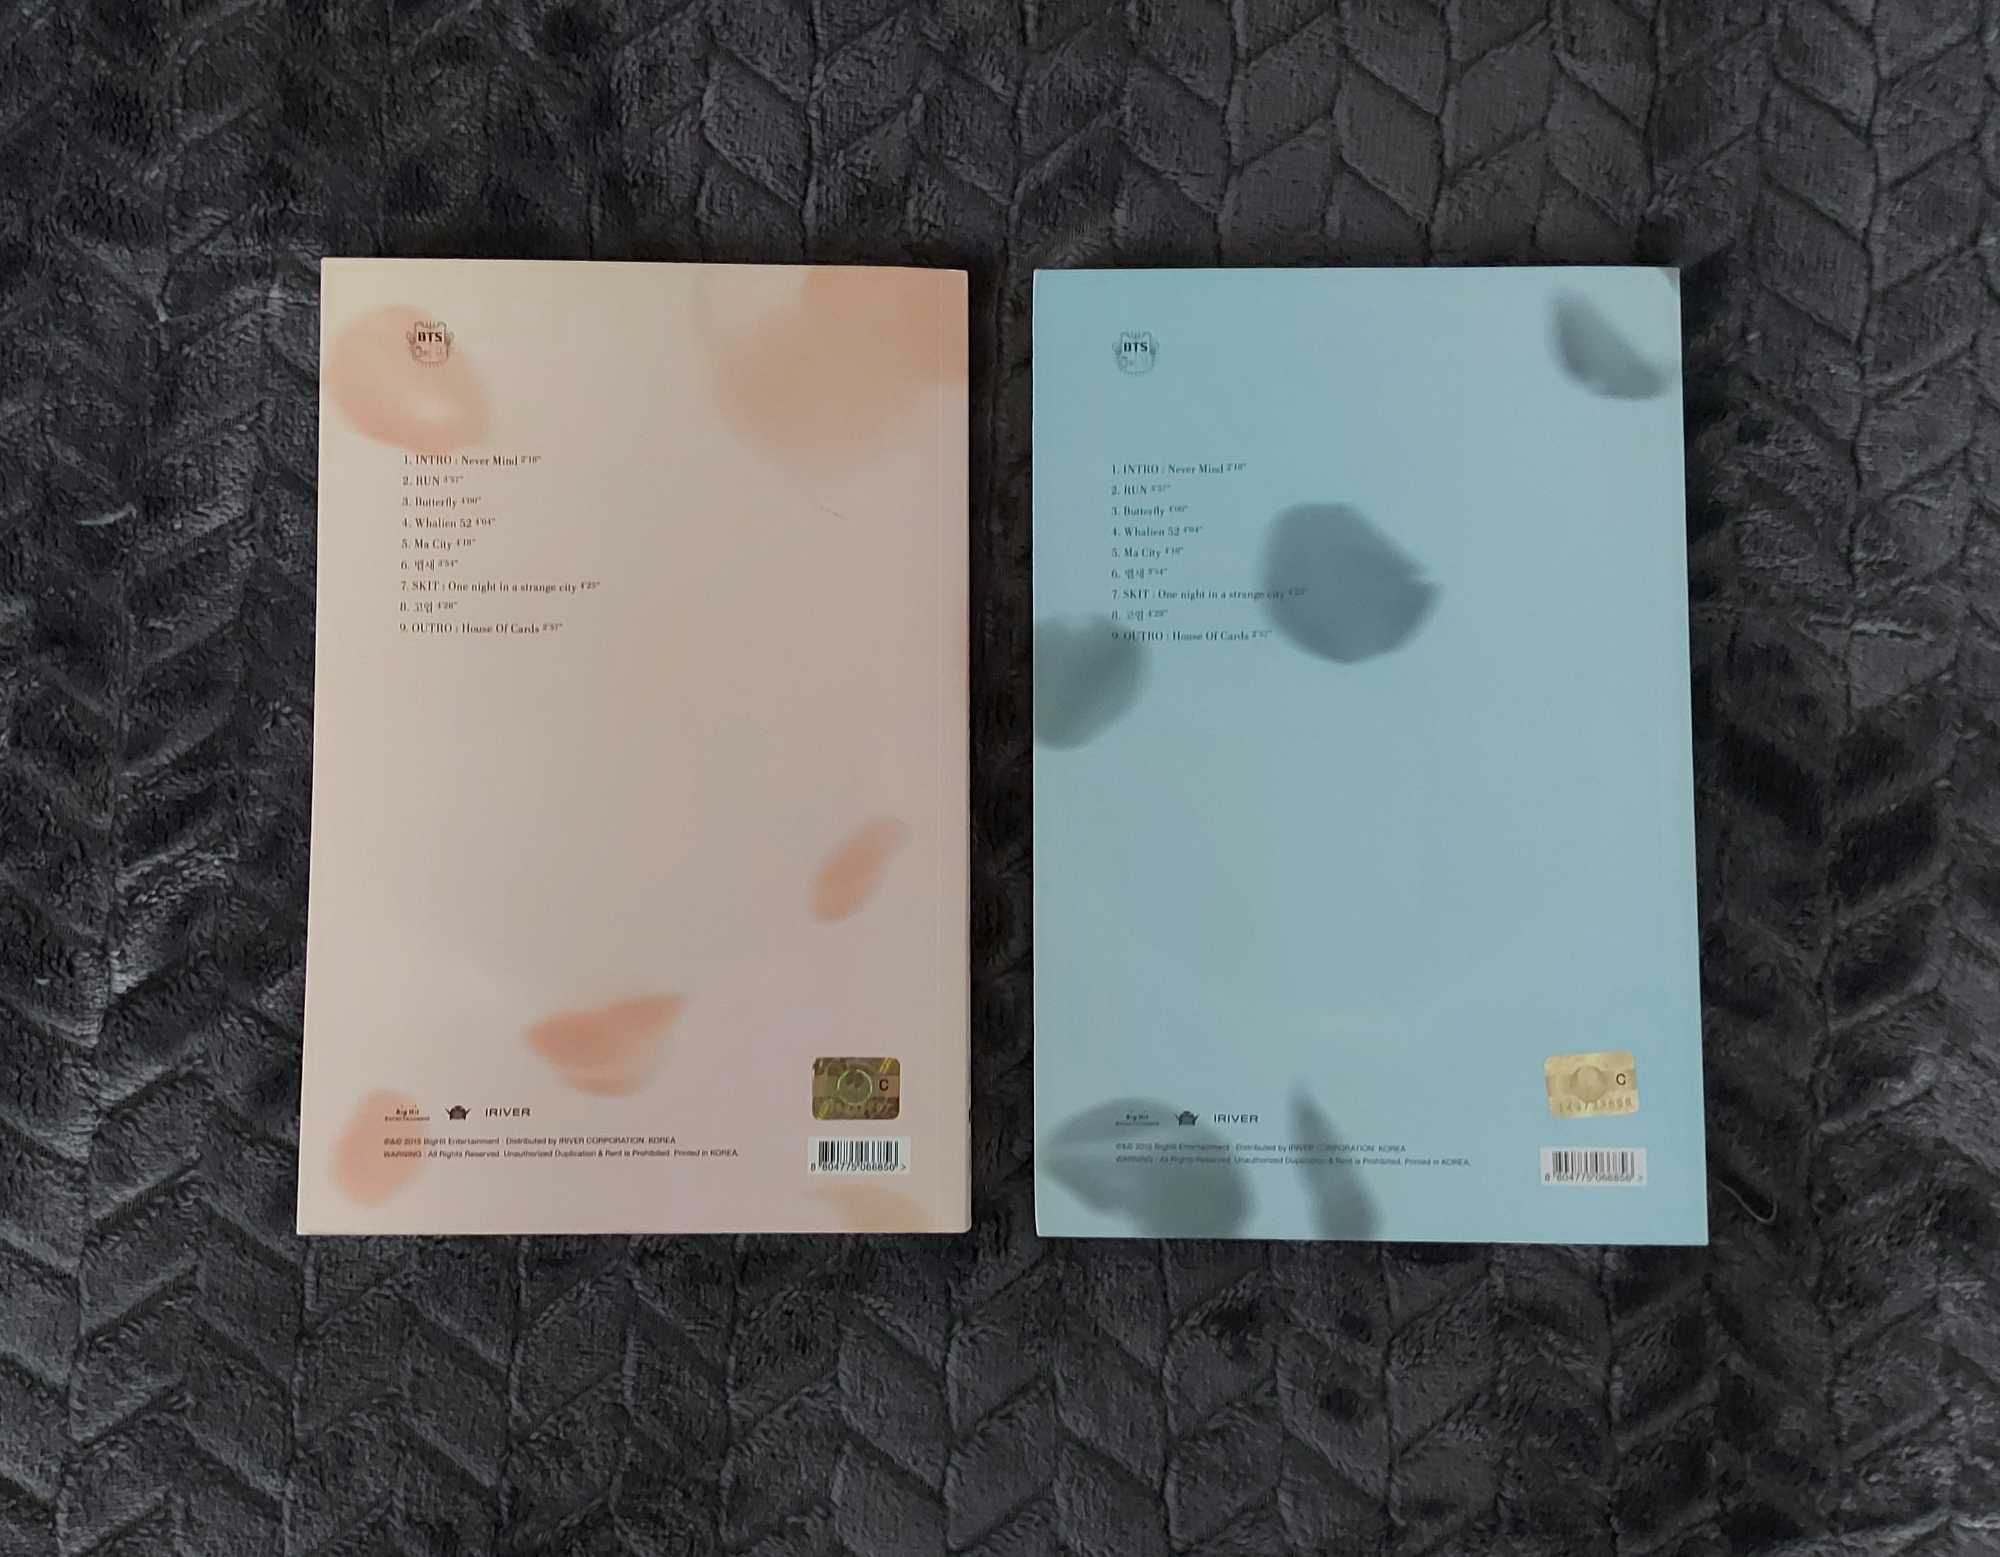 BTS KPOP Album "The Most Beautiful Moment in Life, Part 2"